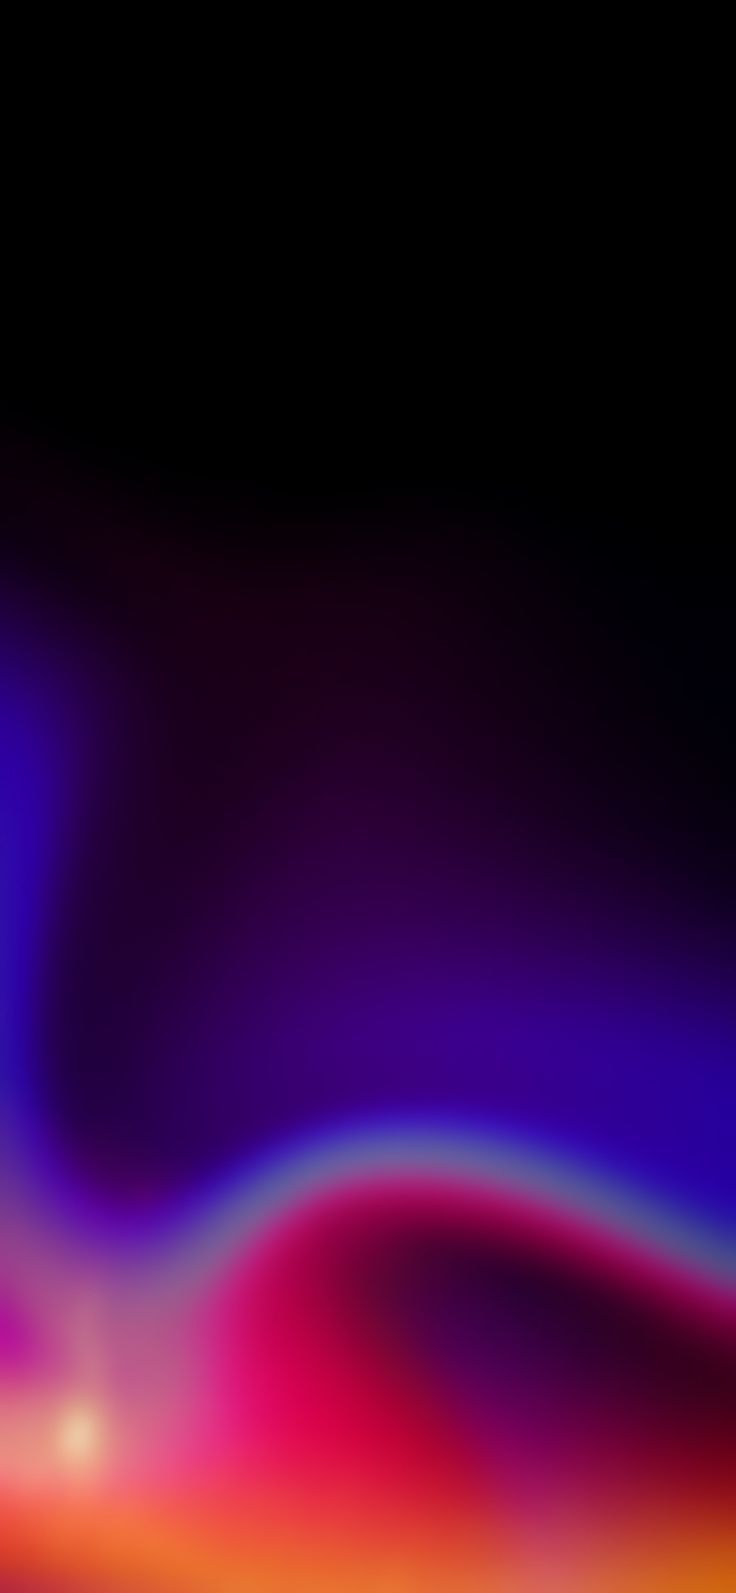 a blurry image of an orange and purple wave on a black background is shown